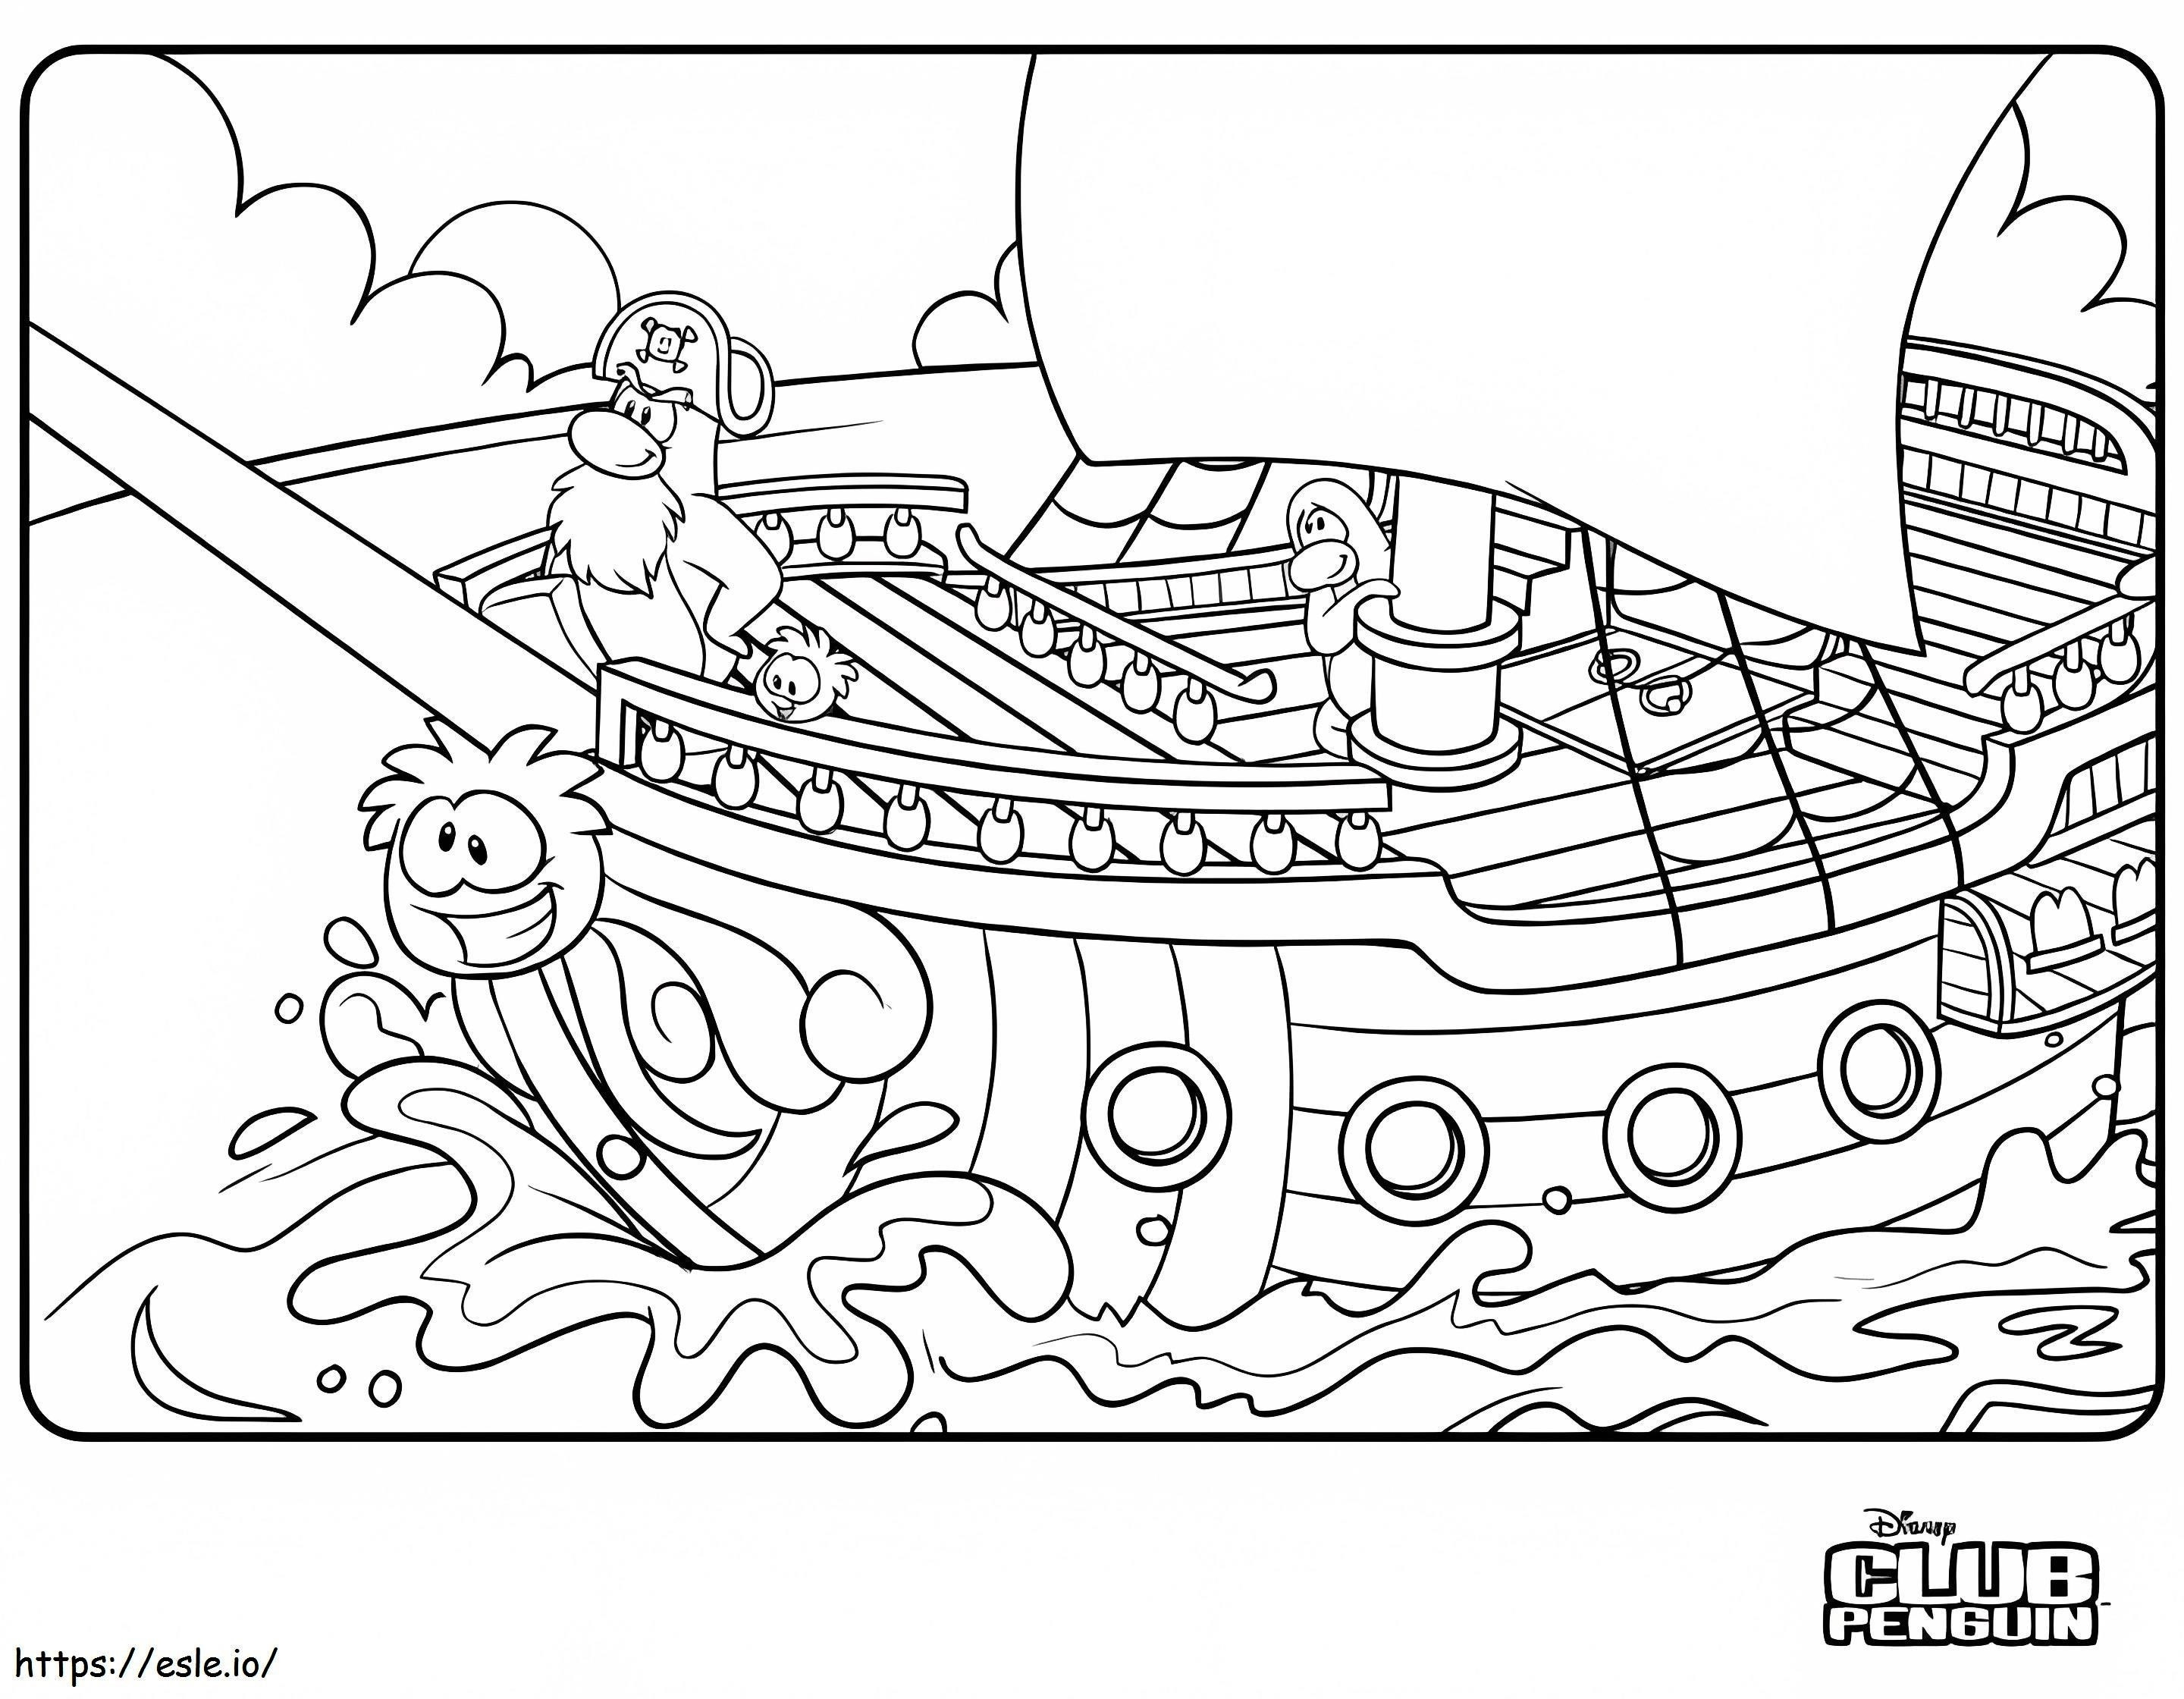 Club Penguin Pirate Ship coloring page